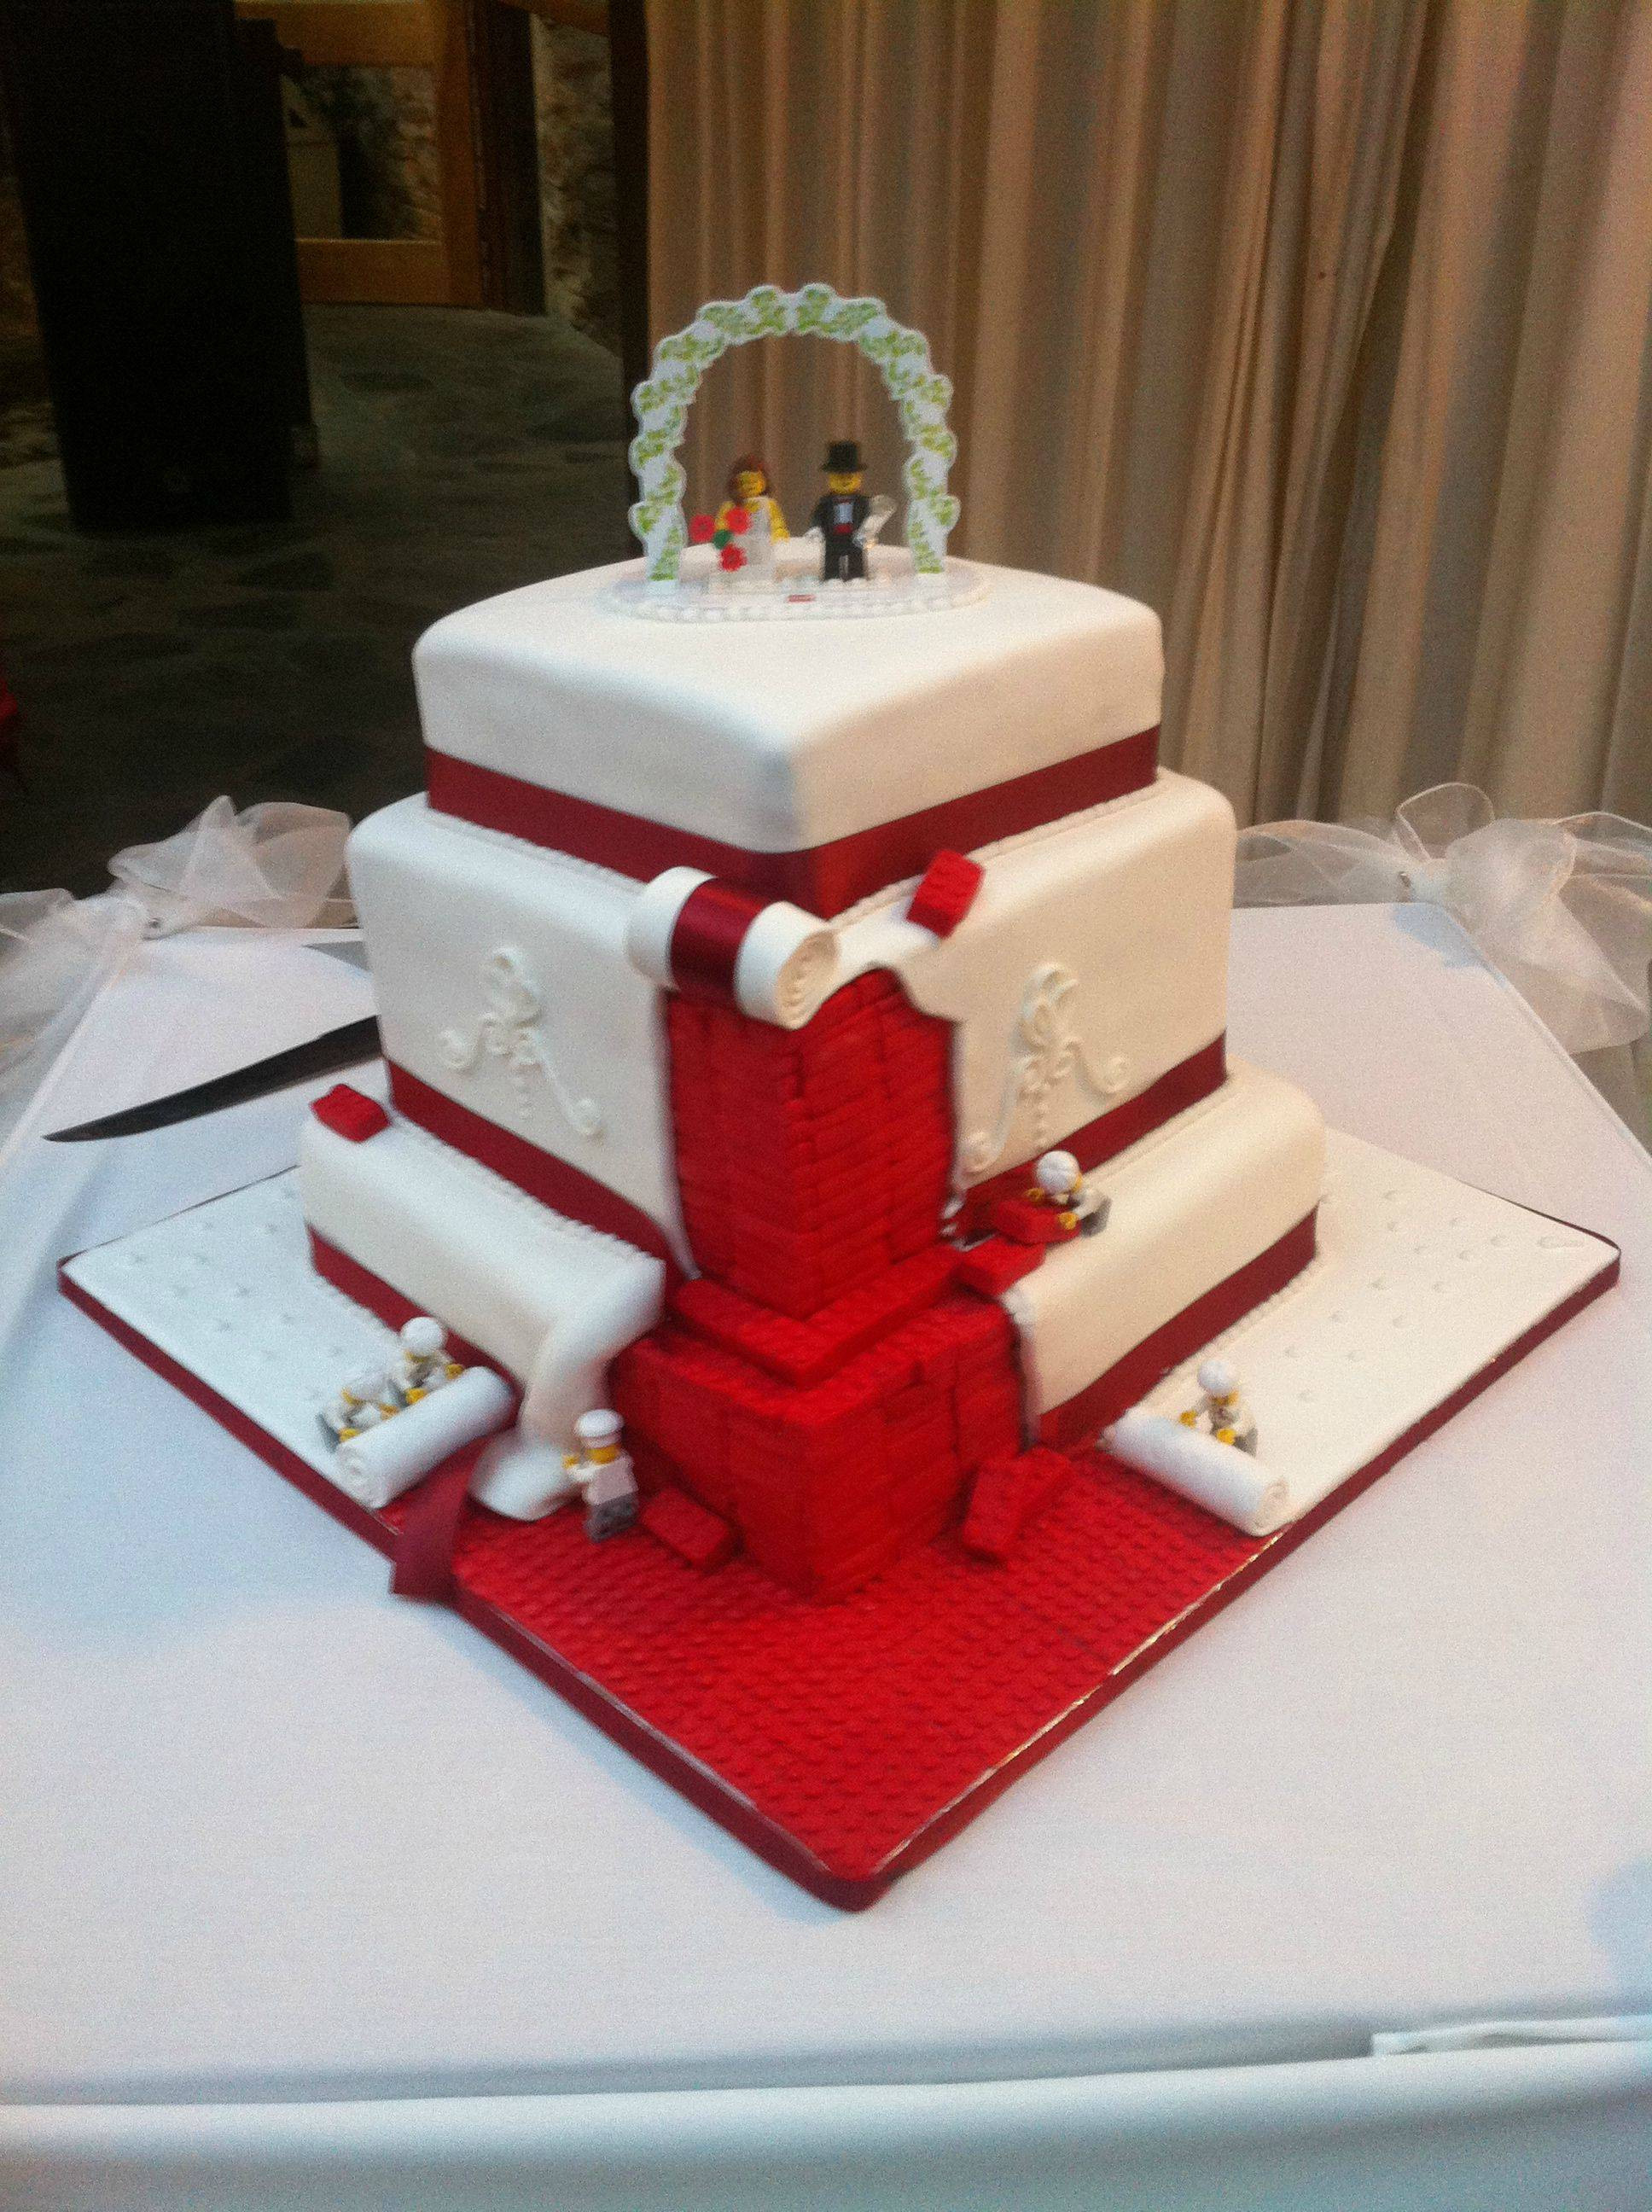 Nerdy Wedding Cakes
 26 Nerdy Wedding Cakes to Geek Out Over